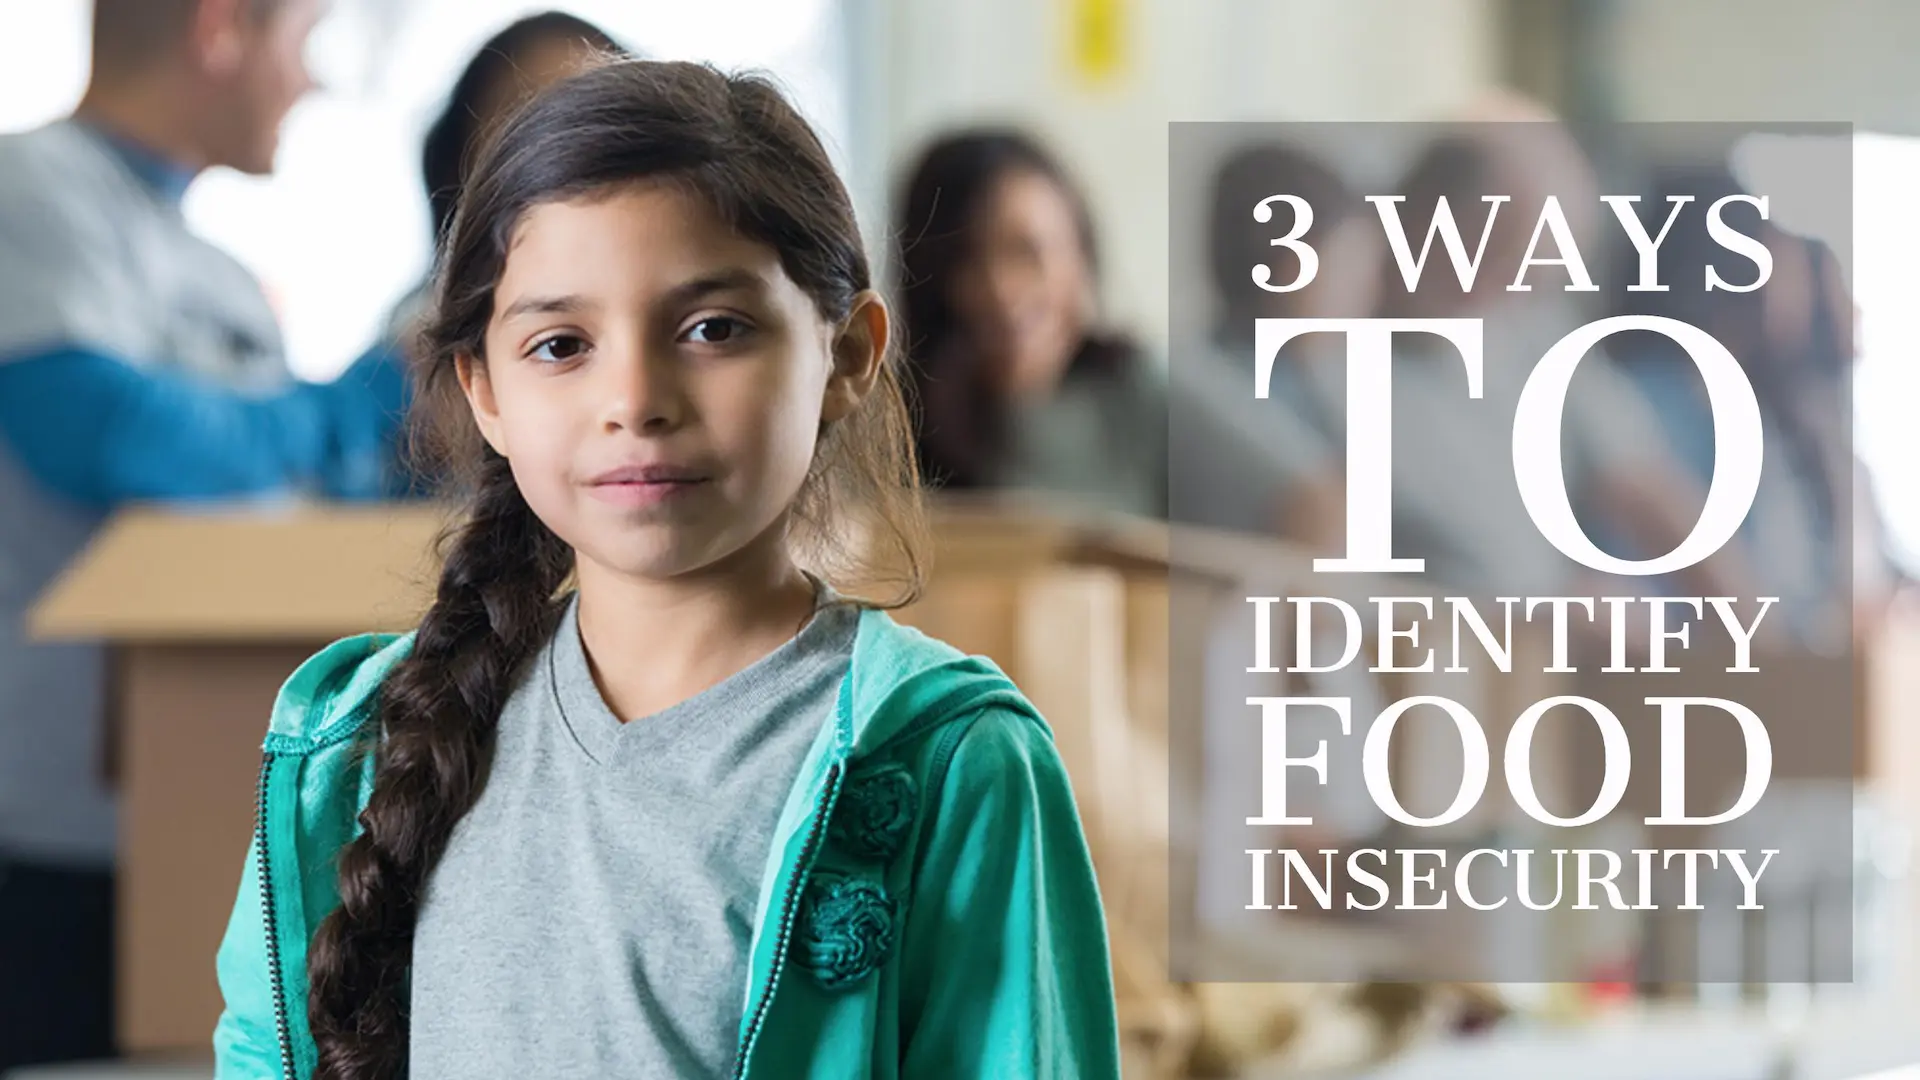 3 Ways to Identify Food Insecurity